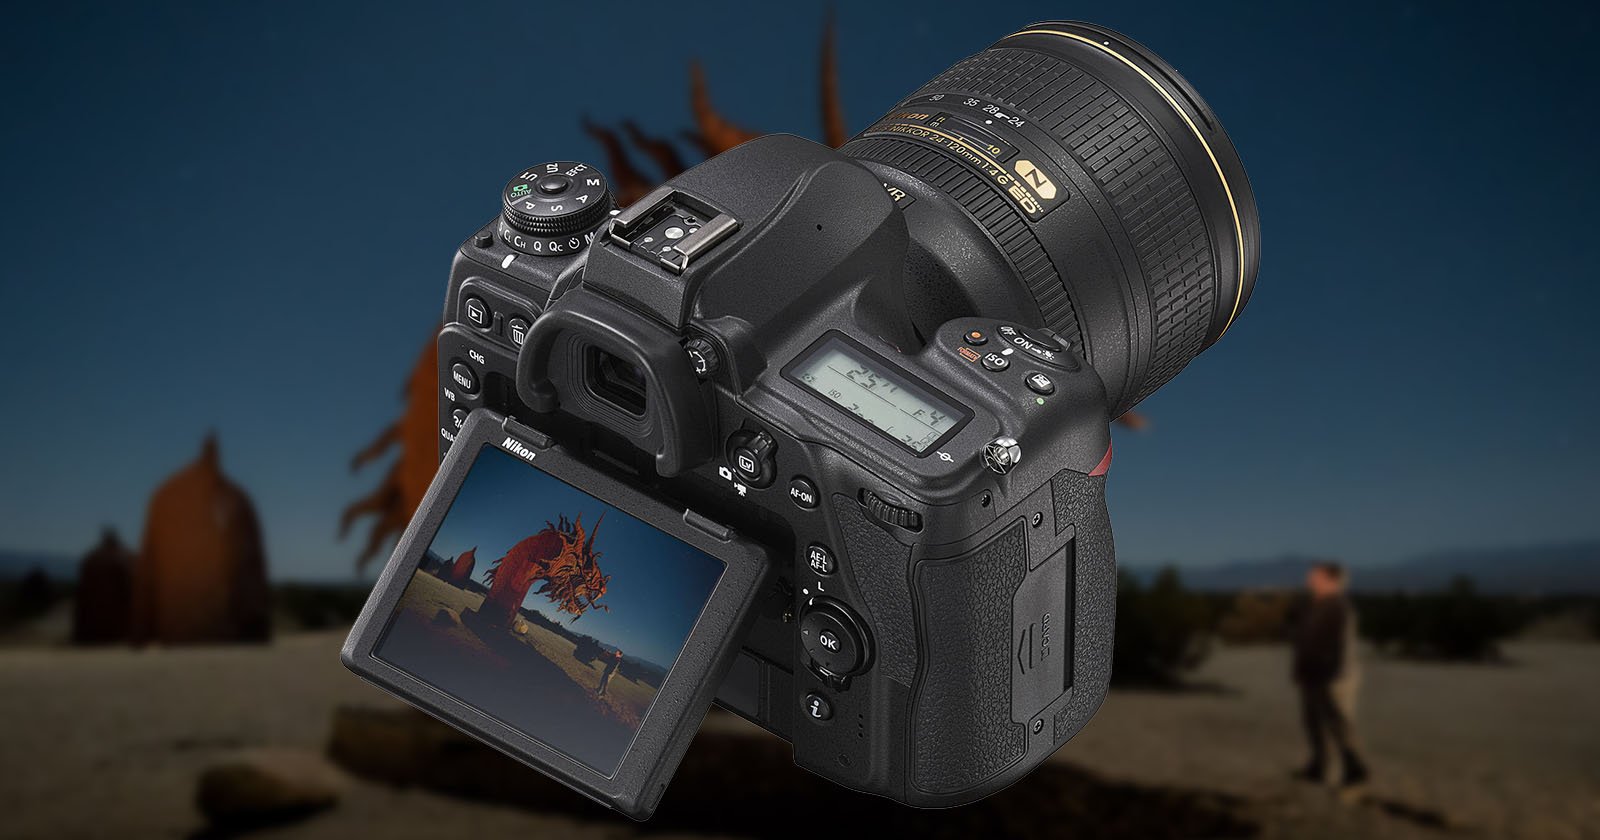 Departure for Withered Admission Best of Both Worlds: The Nikon D780 Gives You the Best of the D750 and Z6 |  PetaPixel